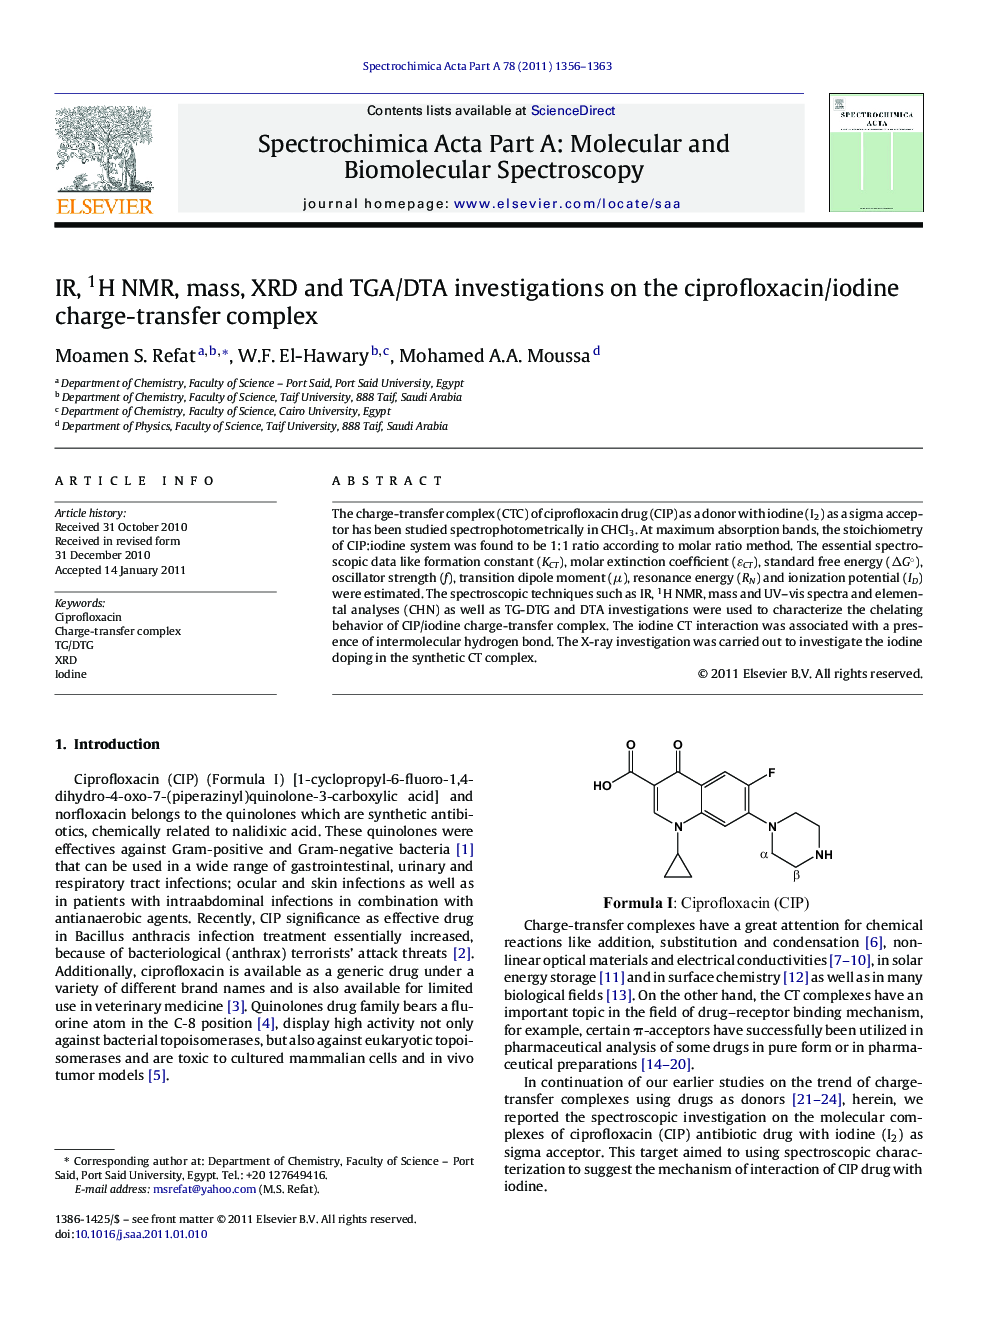 IR, 1H NMR, mass, XRD and TGA/DTA investigations on the ciprofloxacin/iodine charge-transfer complex